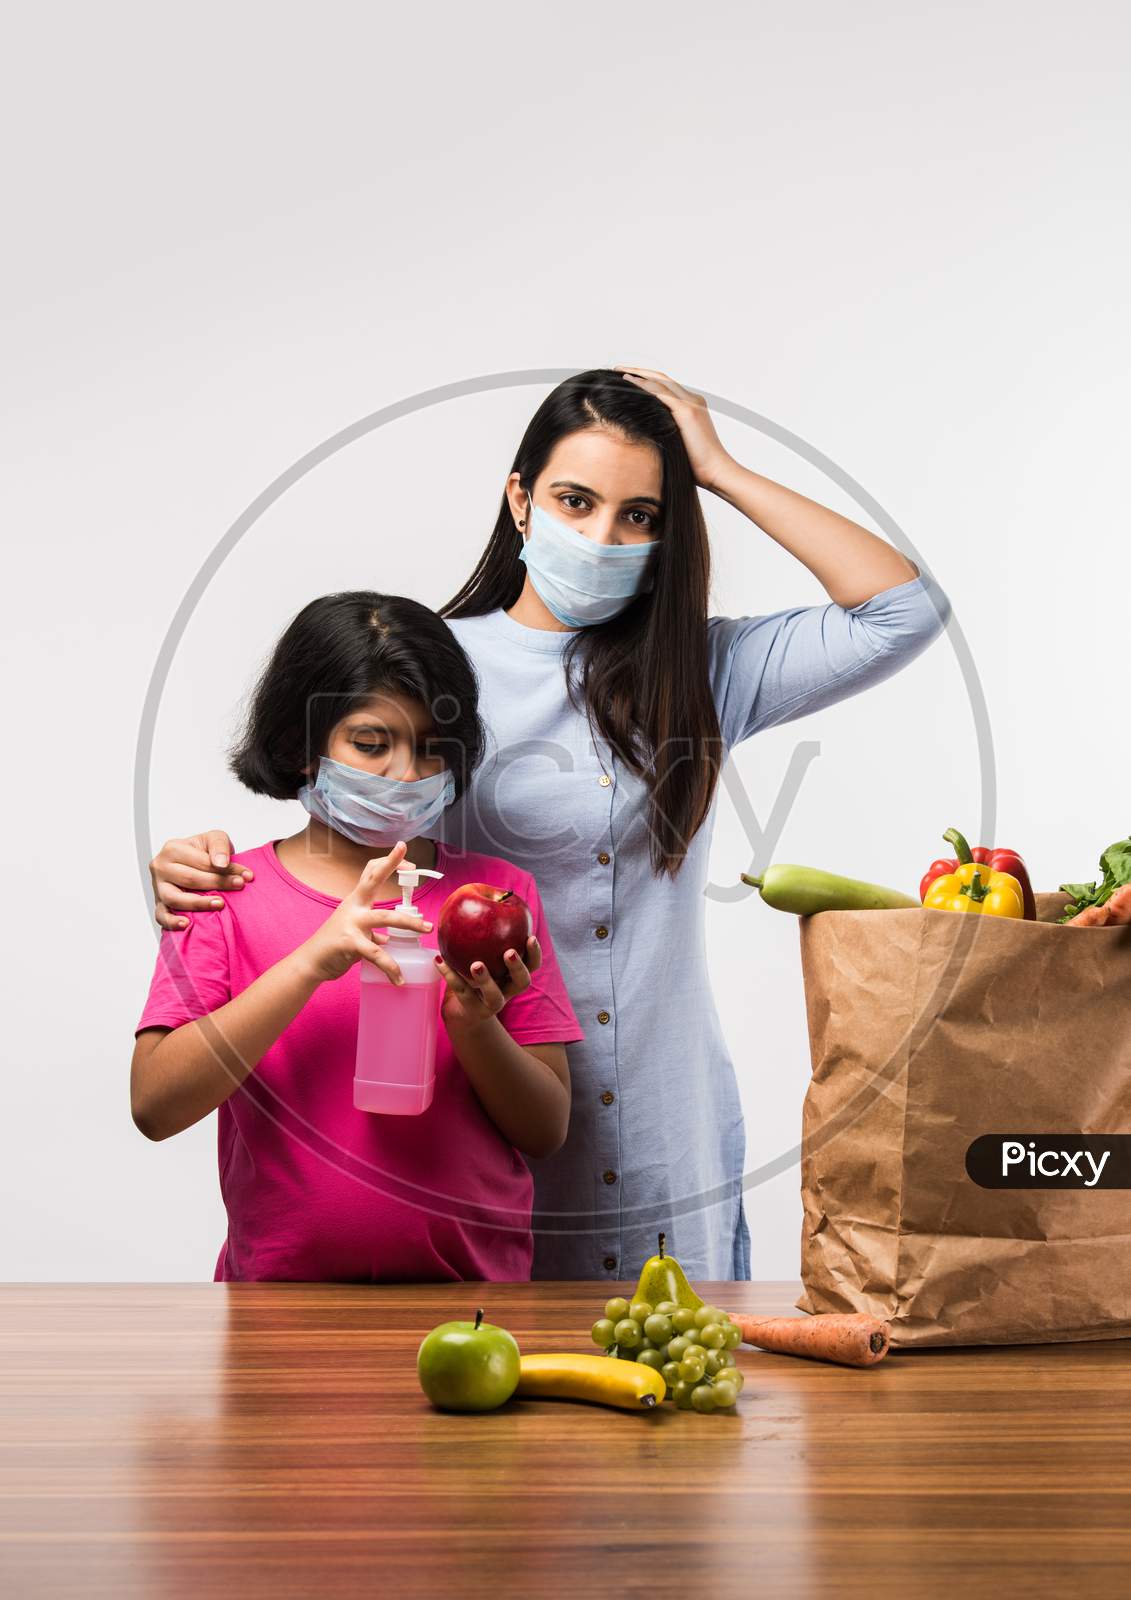 Indian mother daughter disinfecting vegetables with sanitizer while wearing face masks